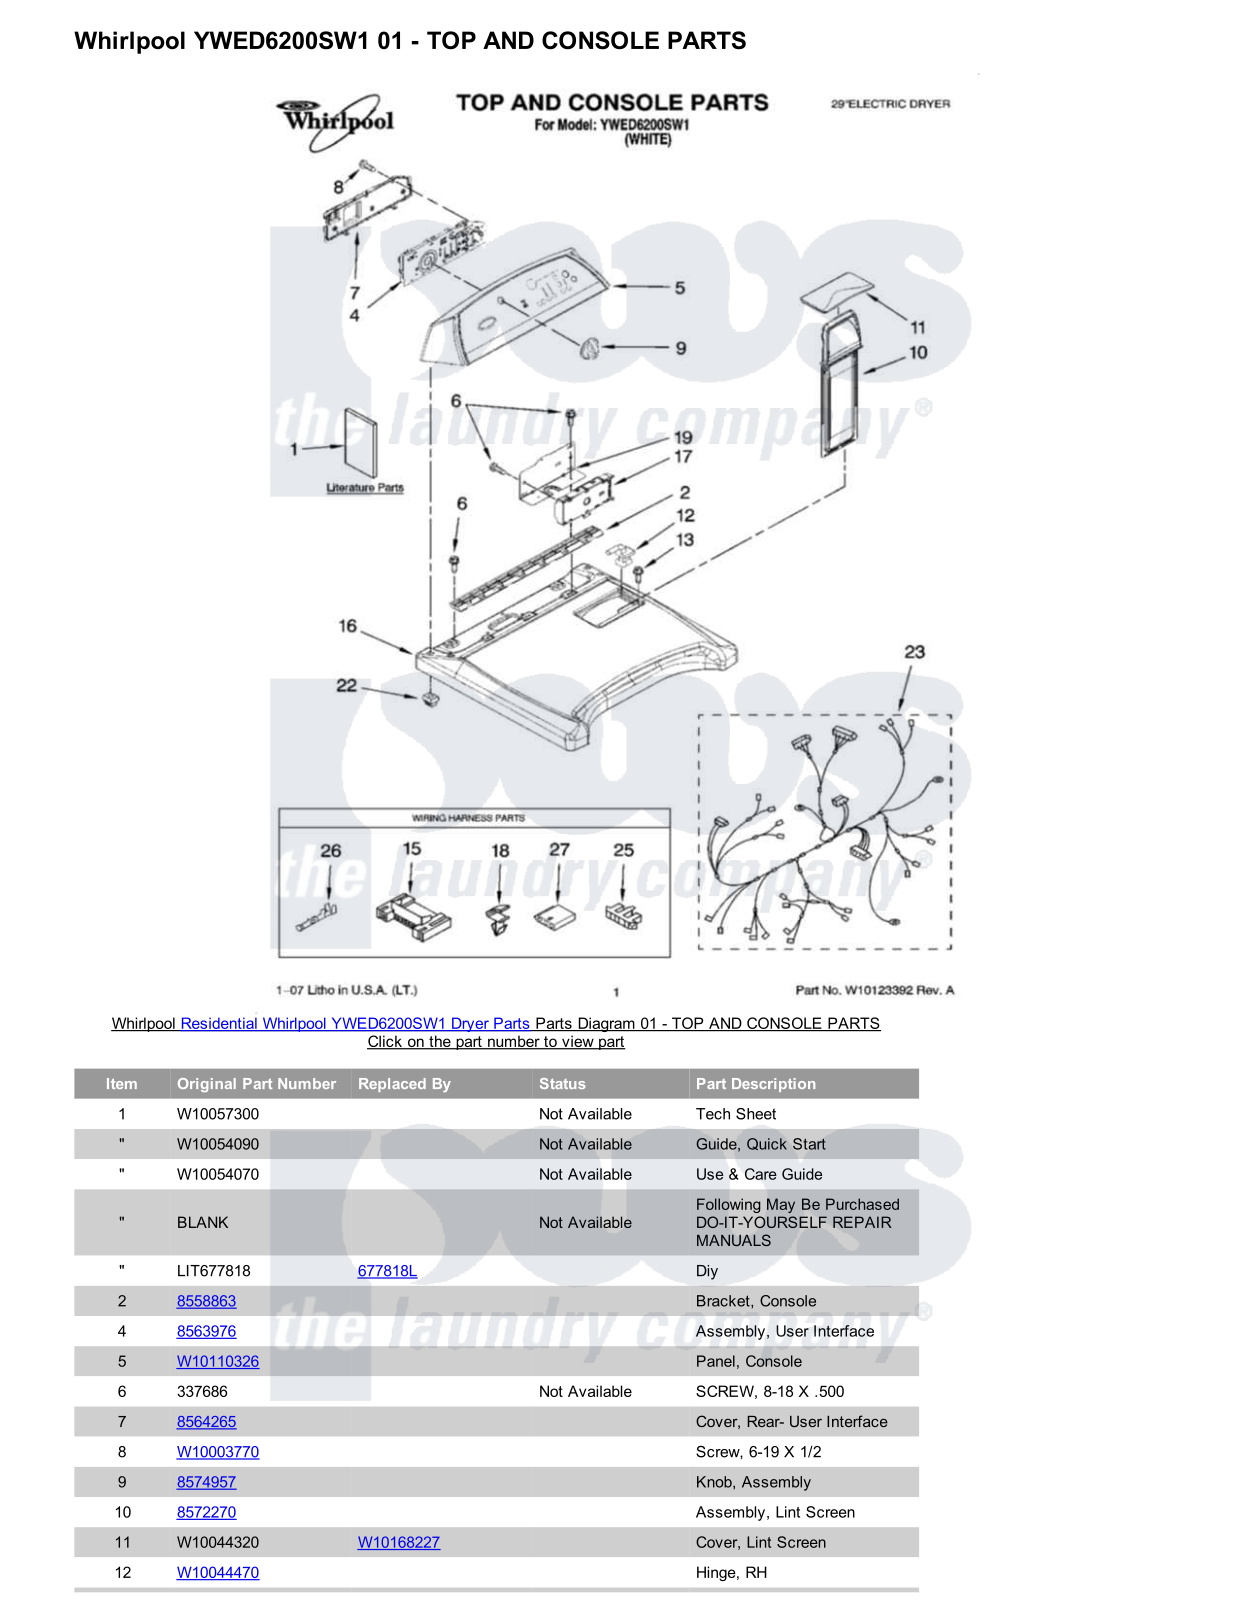 Whirlpool YWED6200SW1 Parts Diagram